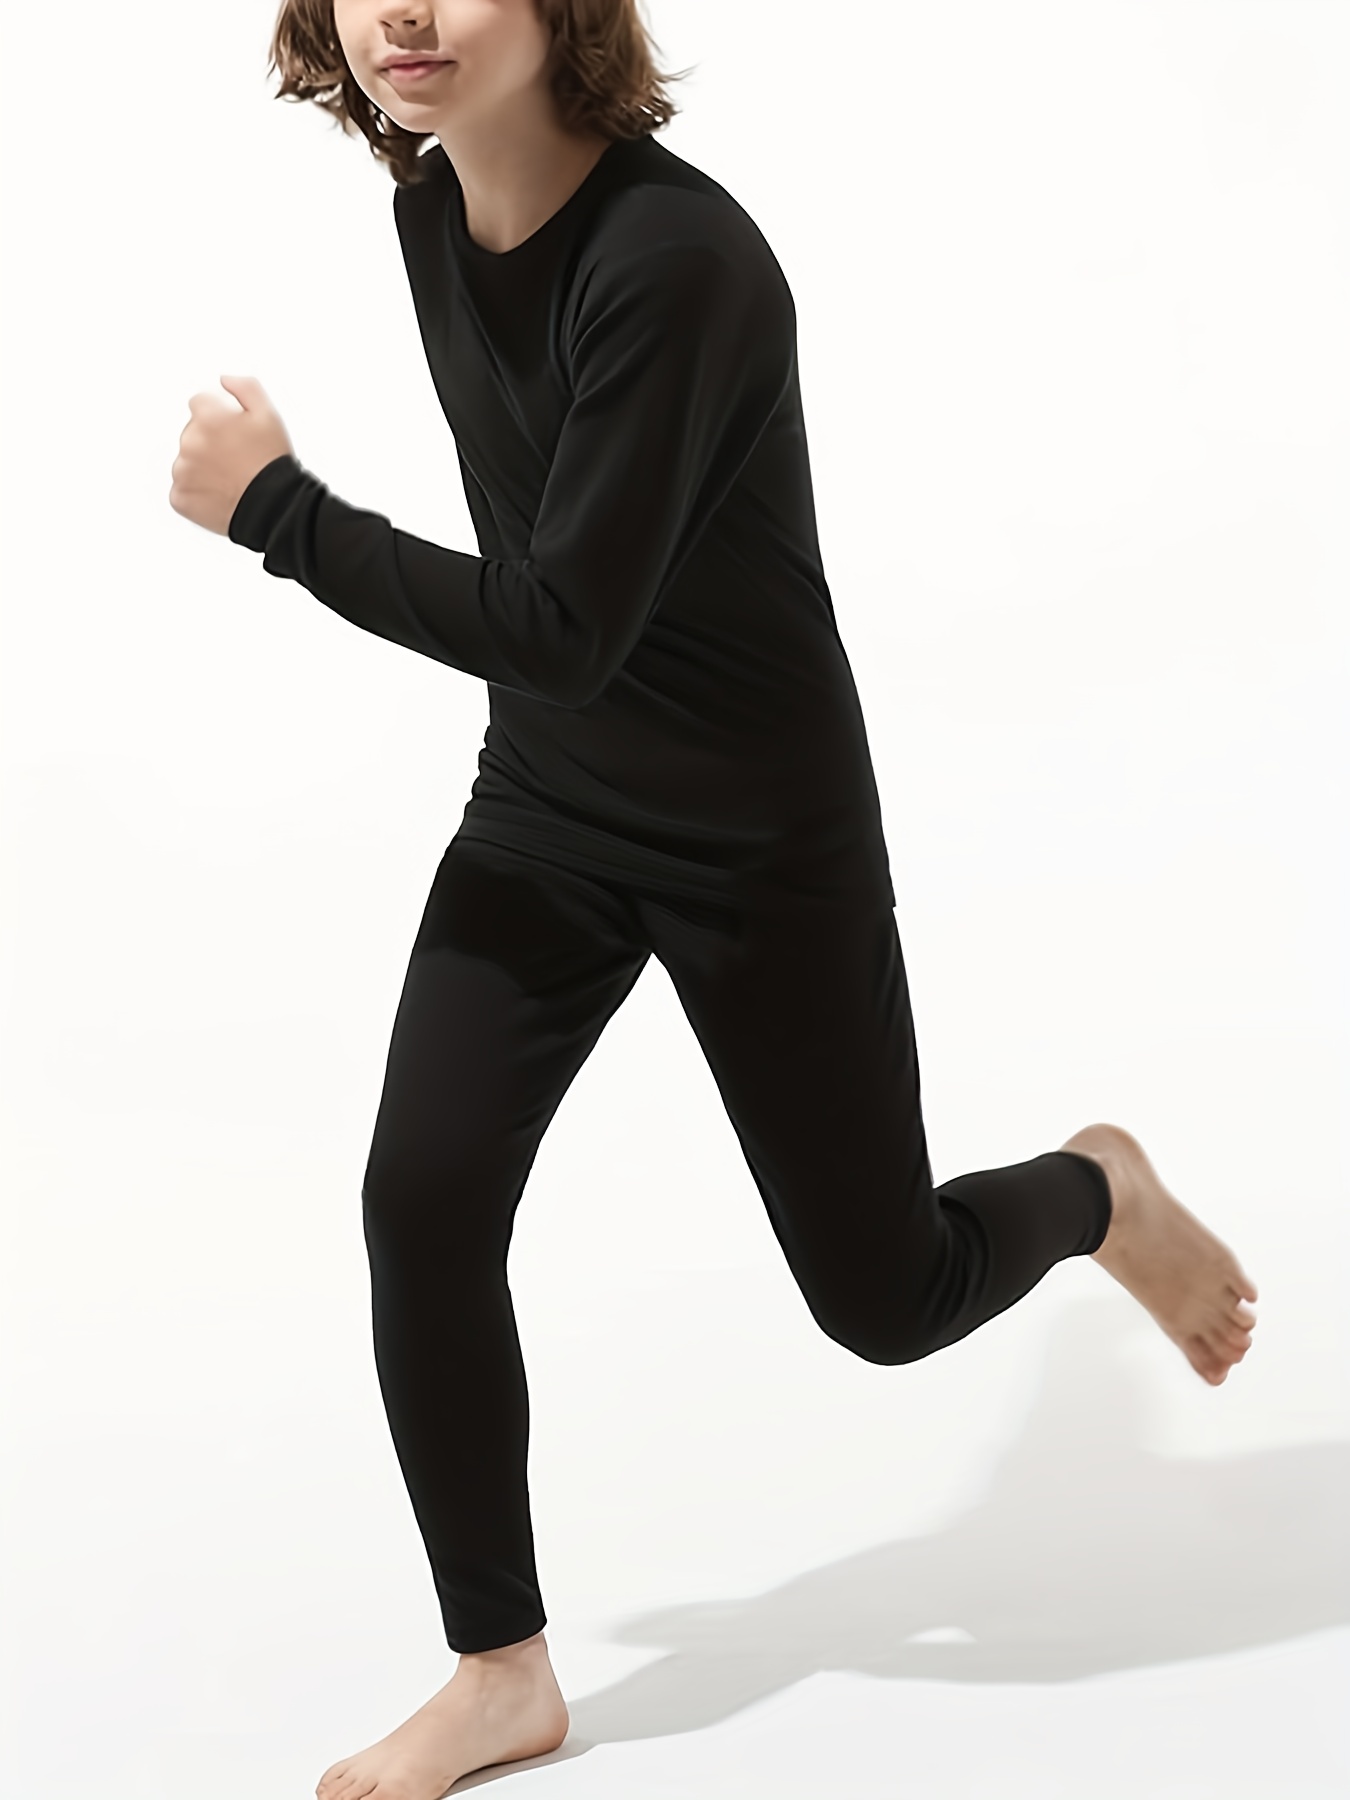 Roadbox Boys Thermal Underwear Sets - Ultra Soft FLeece Lined Long Johns  Base Layer Top and Bottoms with Pockets